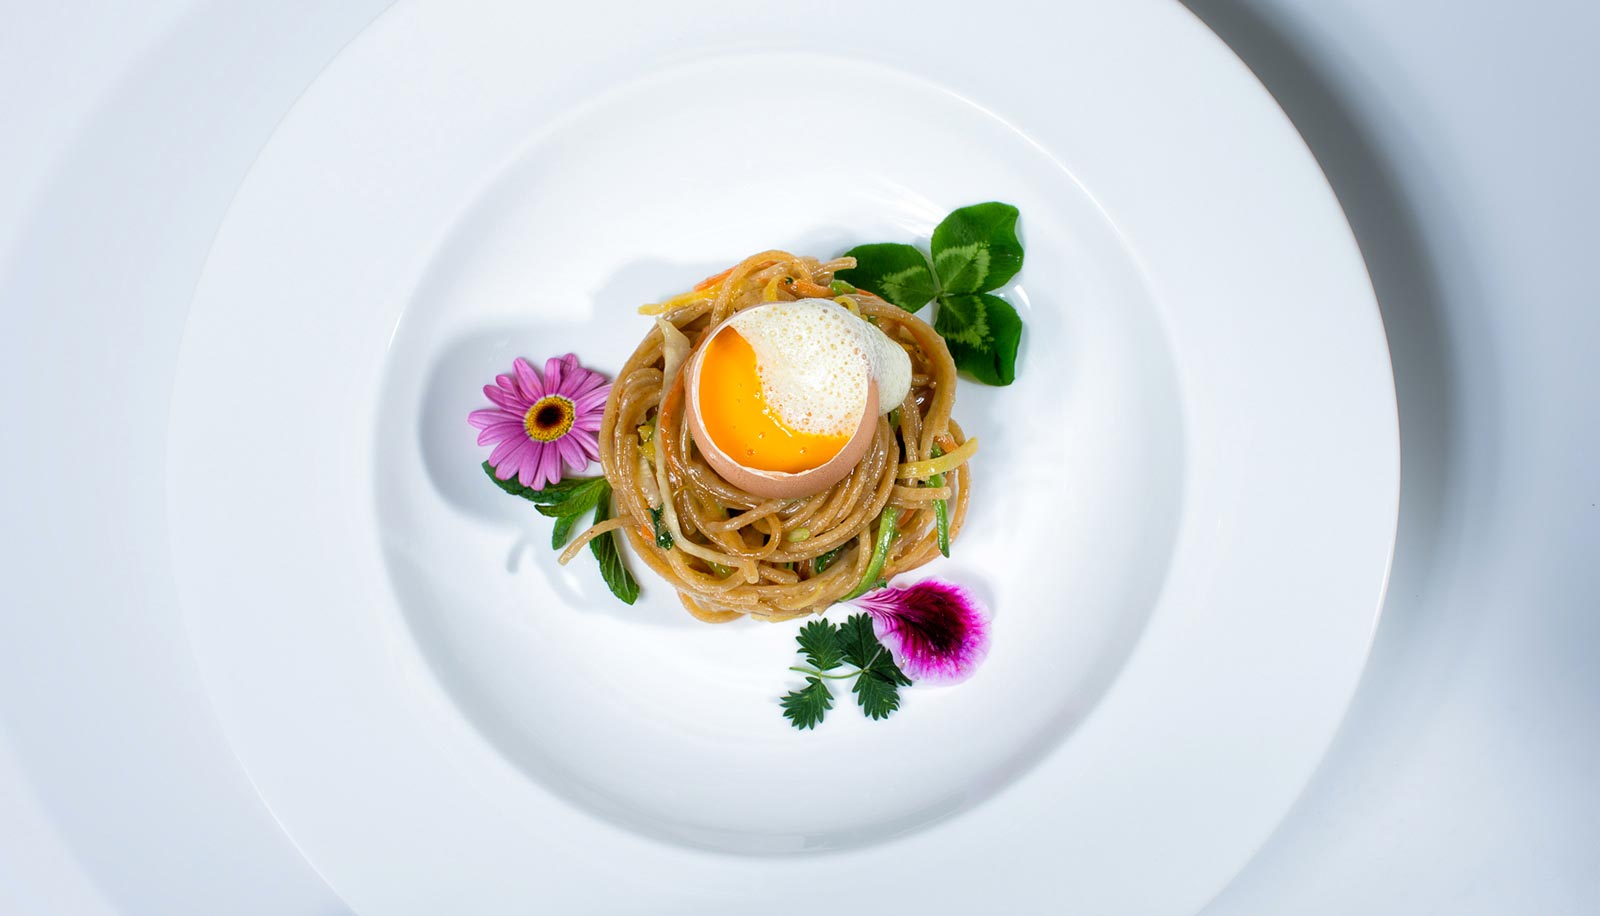 Spaghetti with vegetables and a whole egg, decorated with flowers